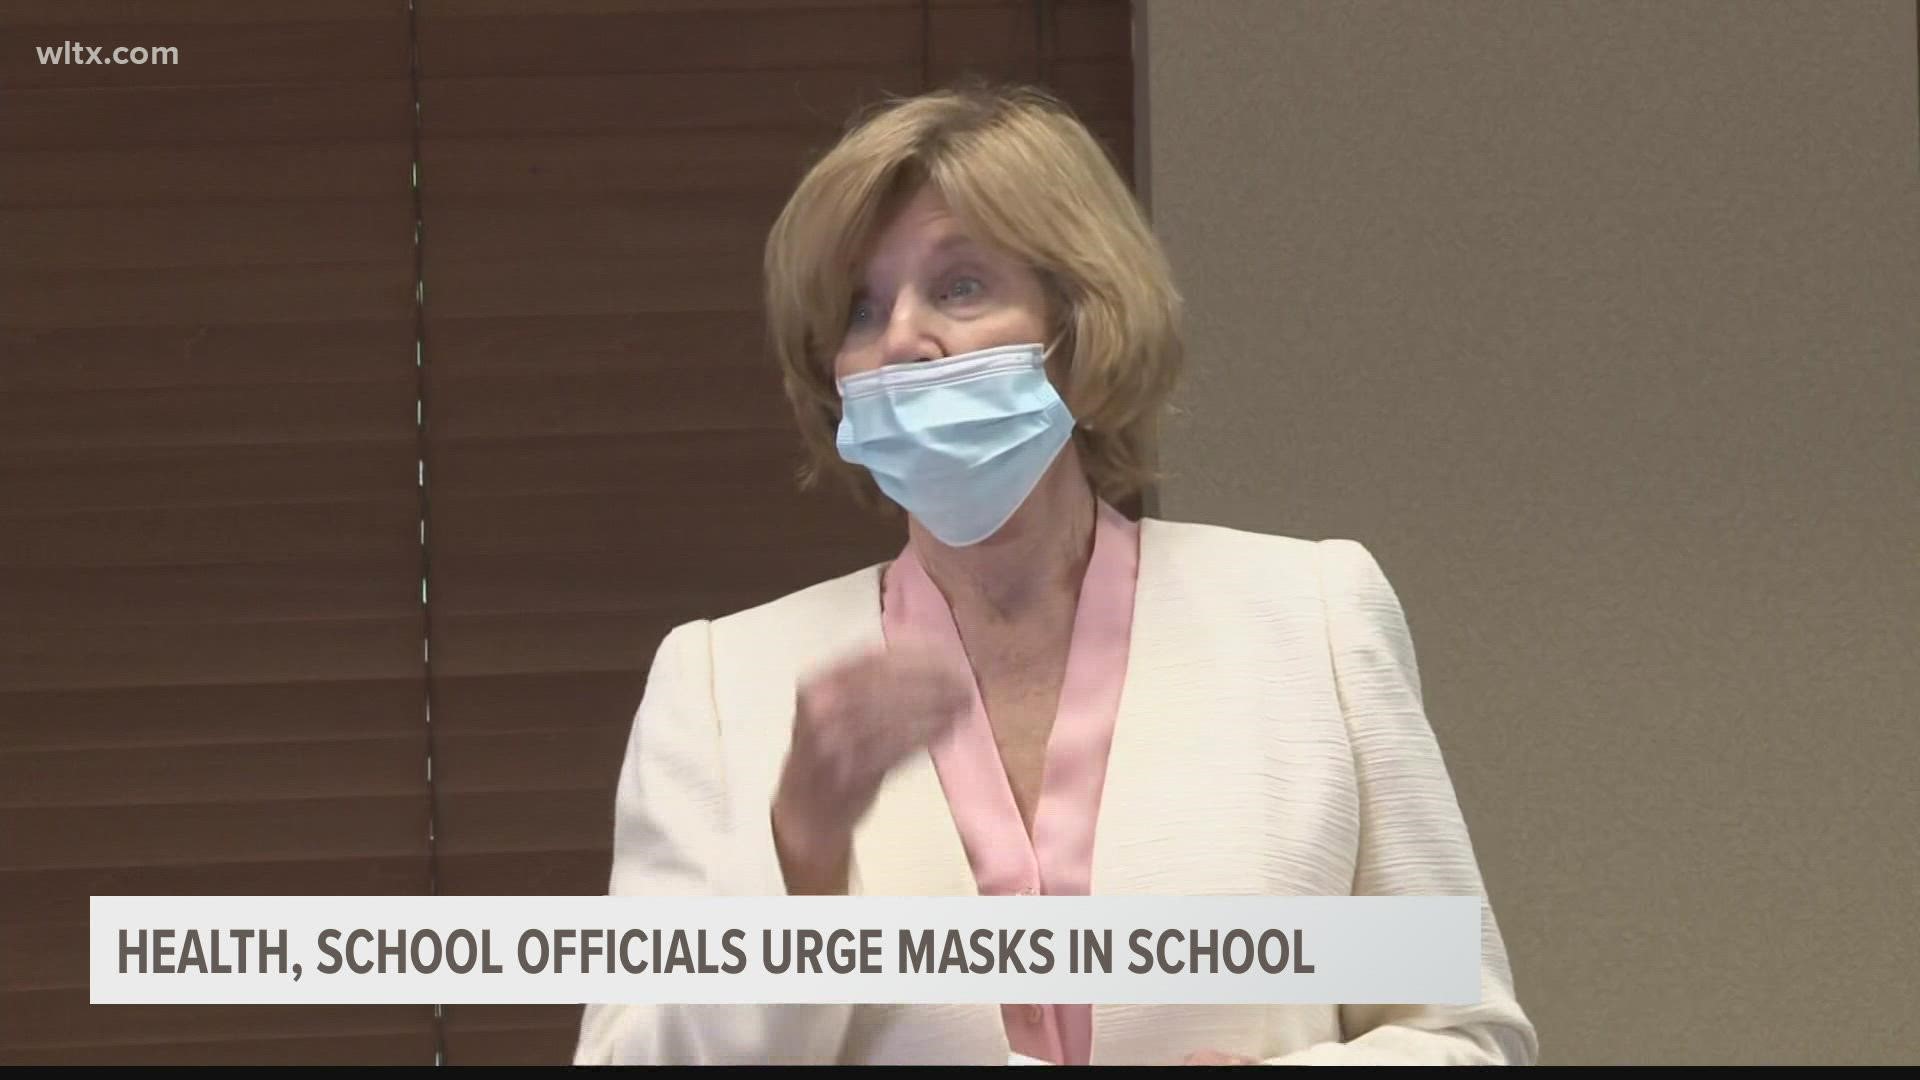 The state schools leader and health experts say universal mask wearing and vaccines are the only way out of the virus.